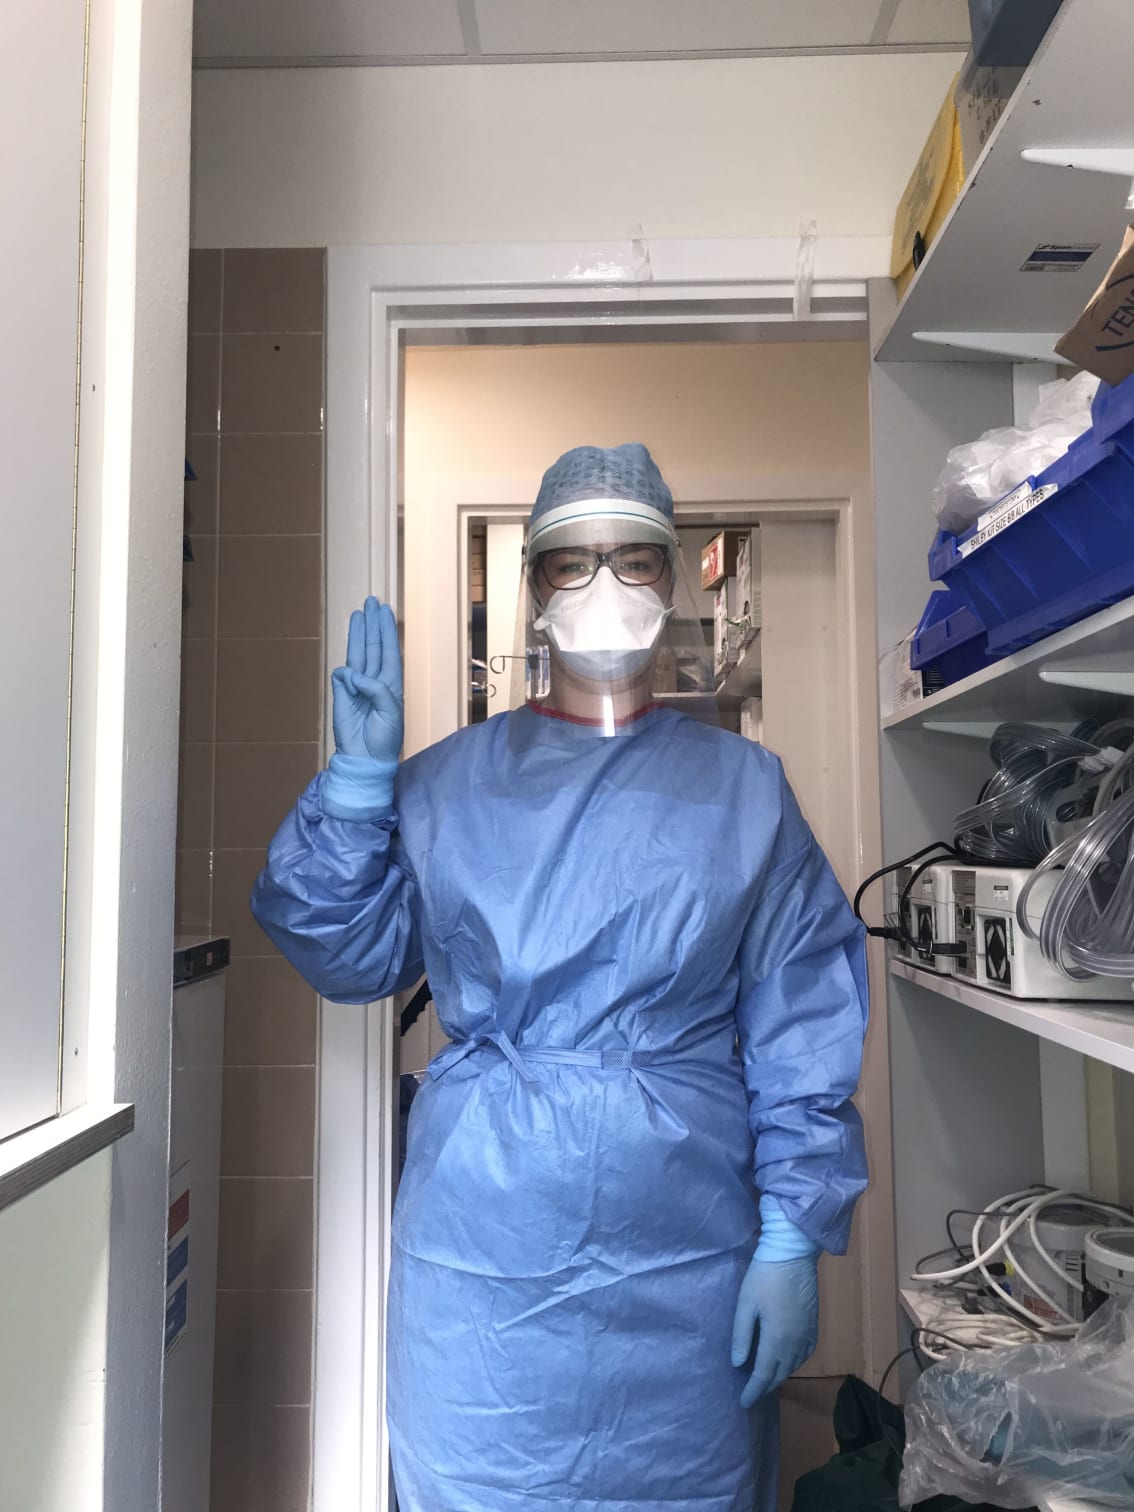 An image of Sarah in full PPE gear